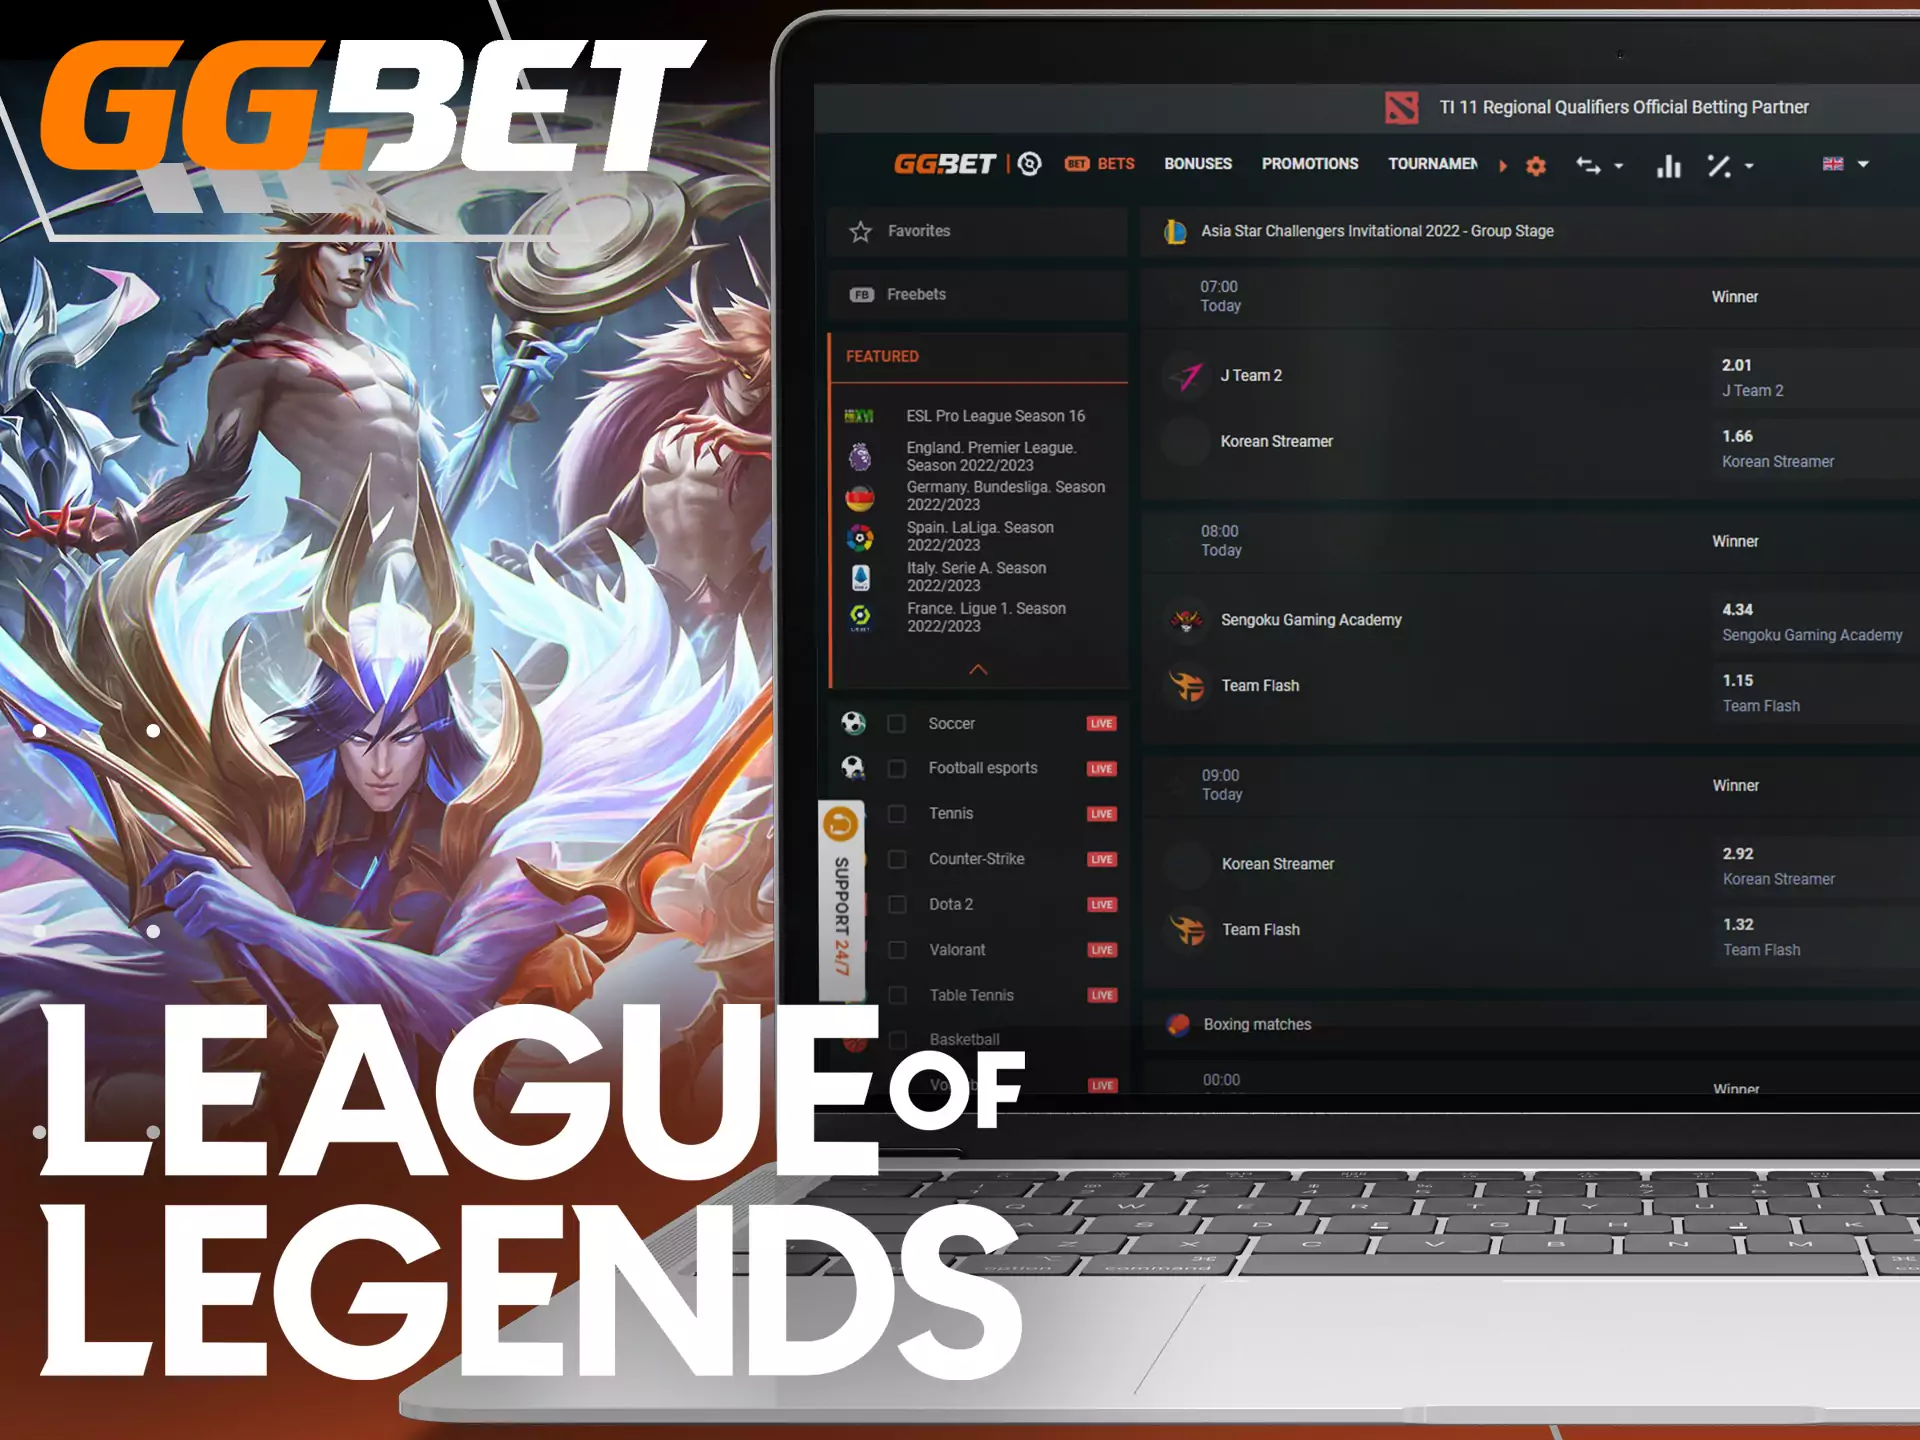 League of Legends is widely presented in the GGBet sportsbook.